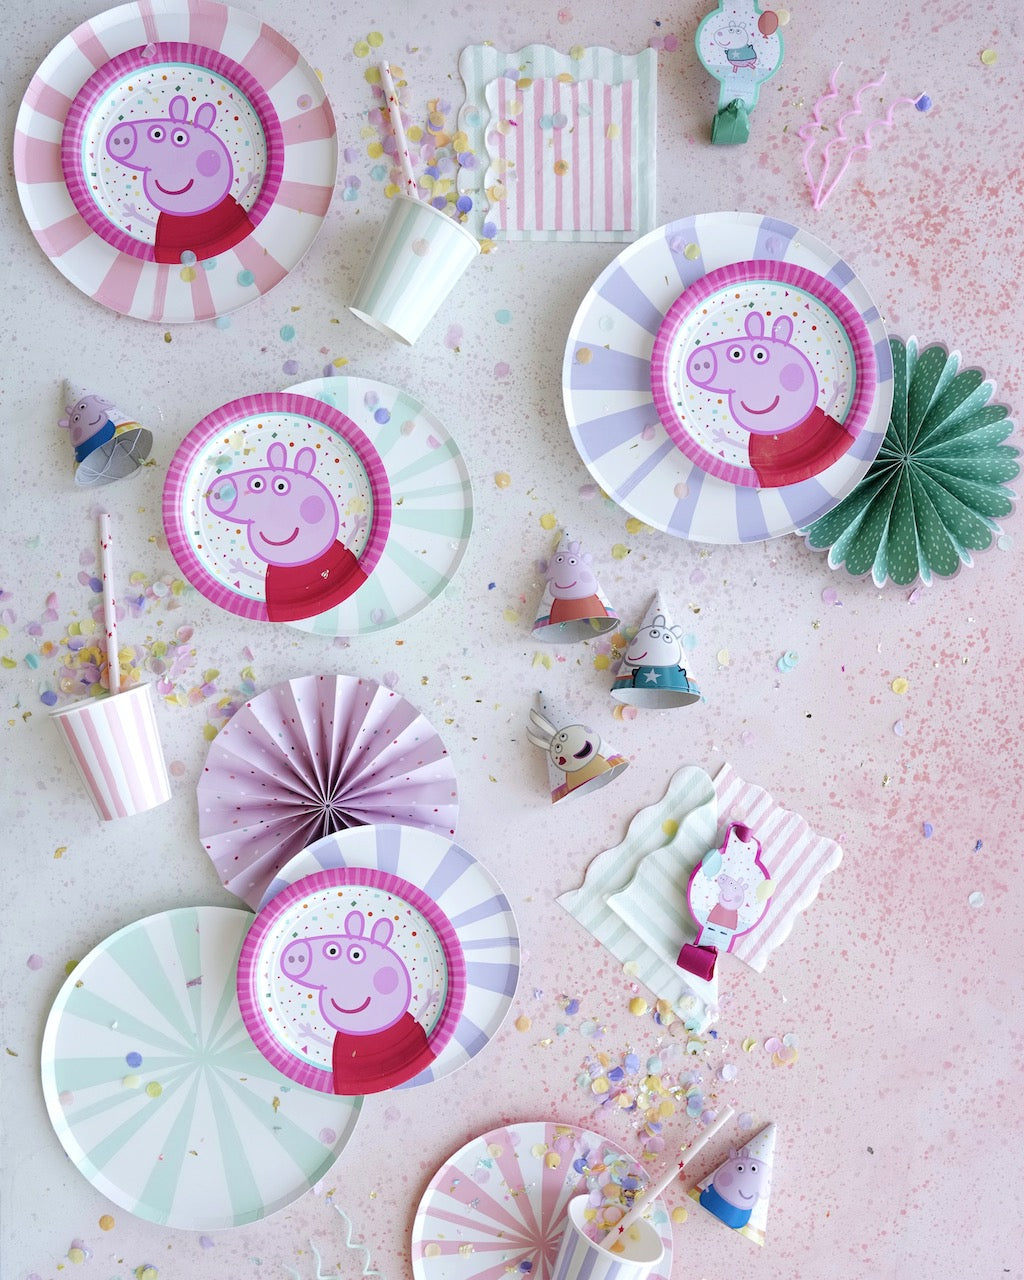 Peppa Pig party supplies for a girl's birthday party.